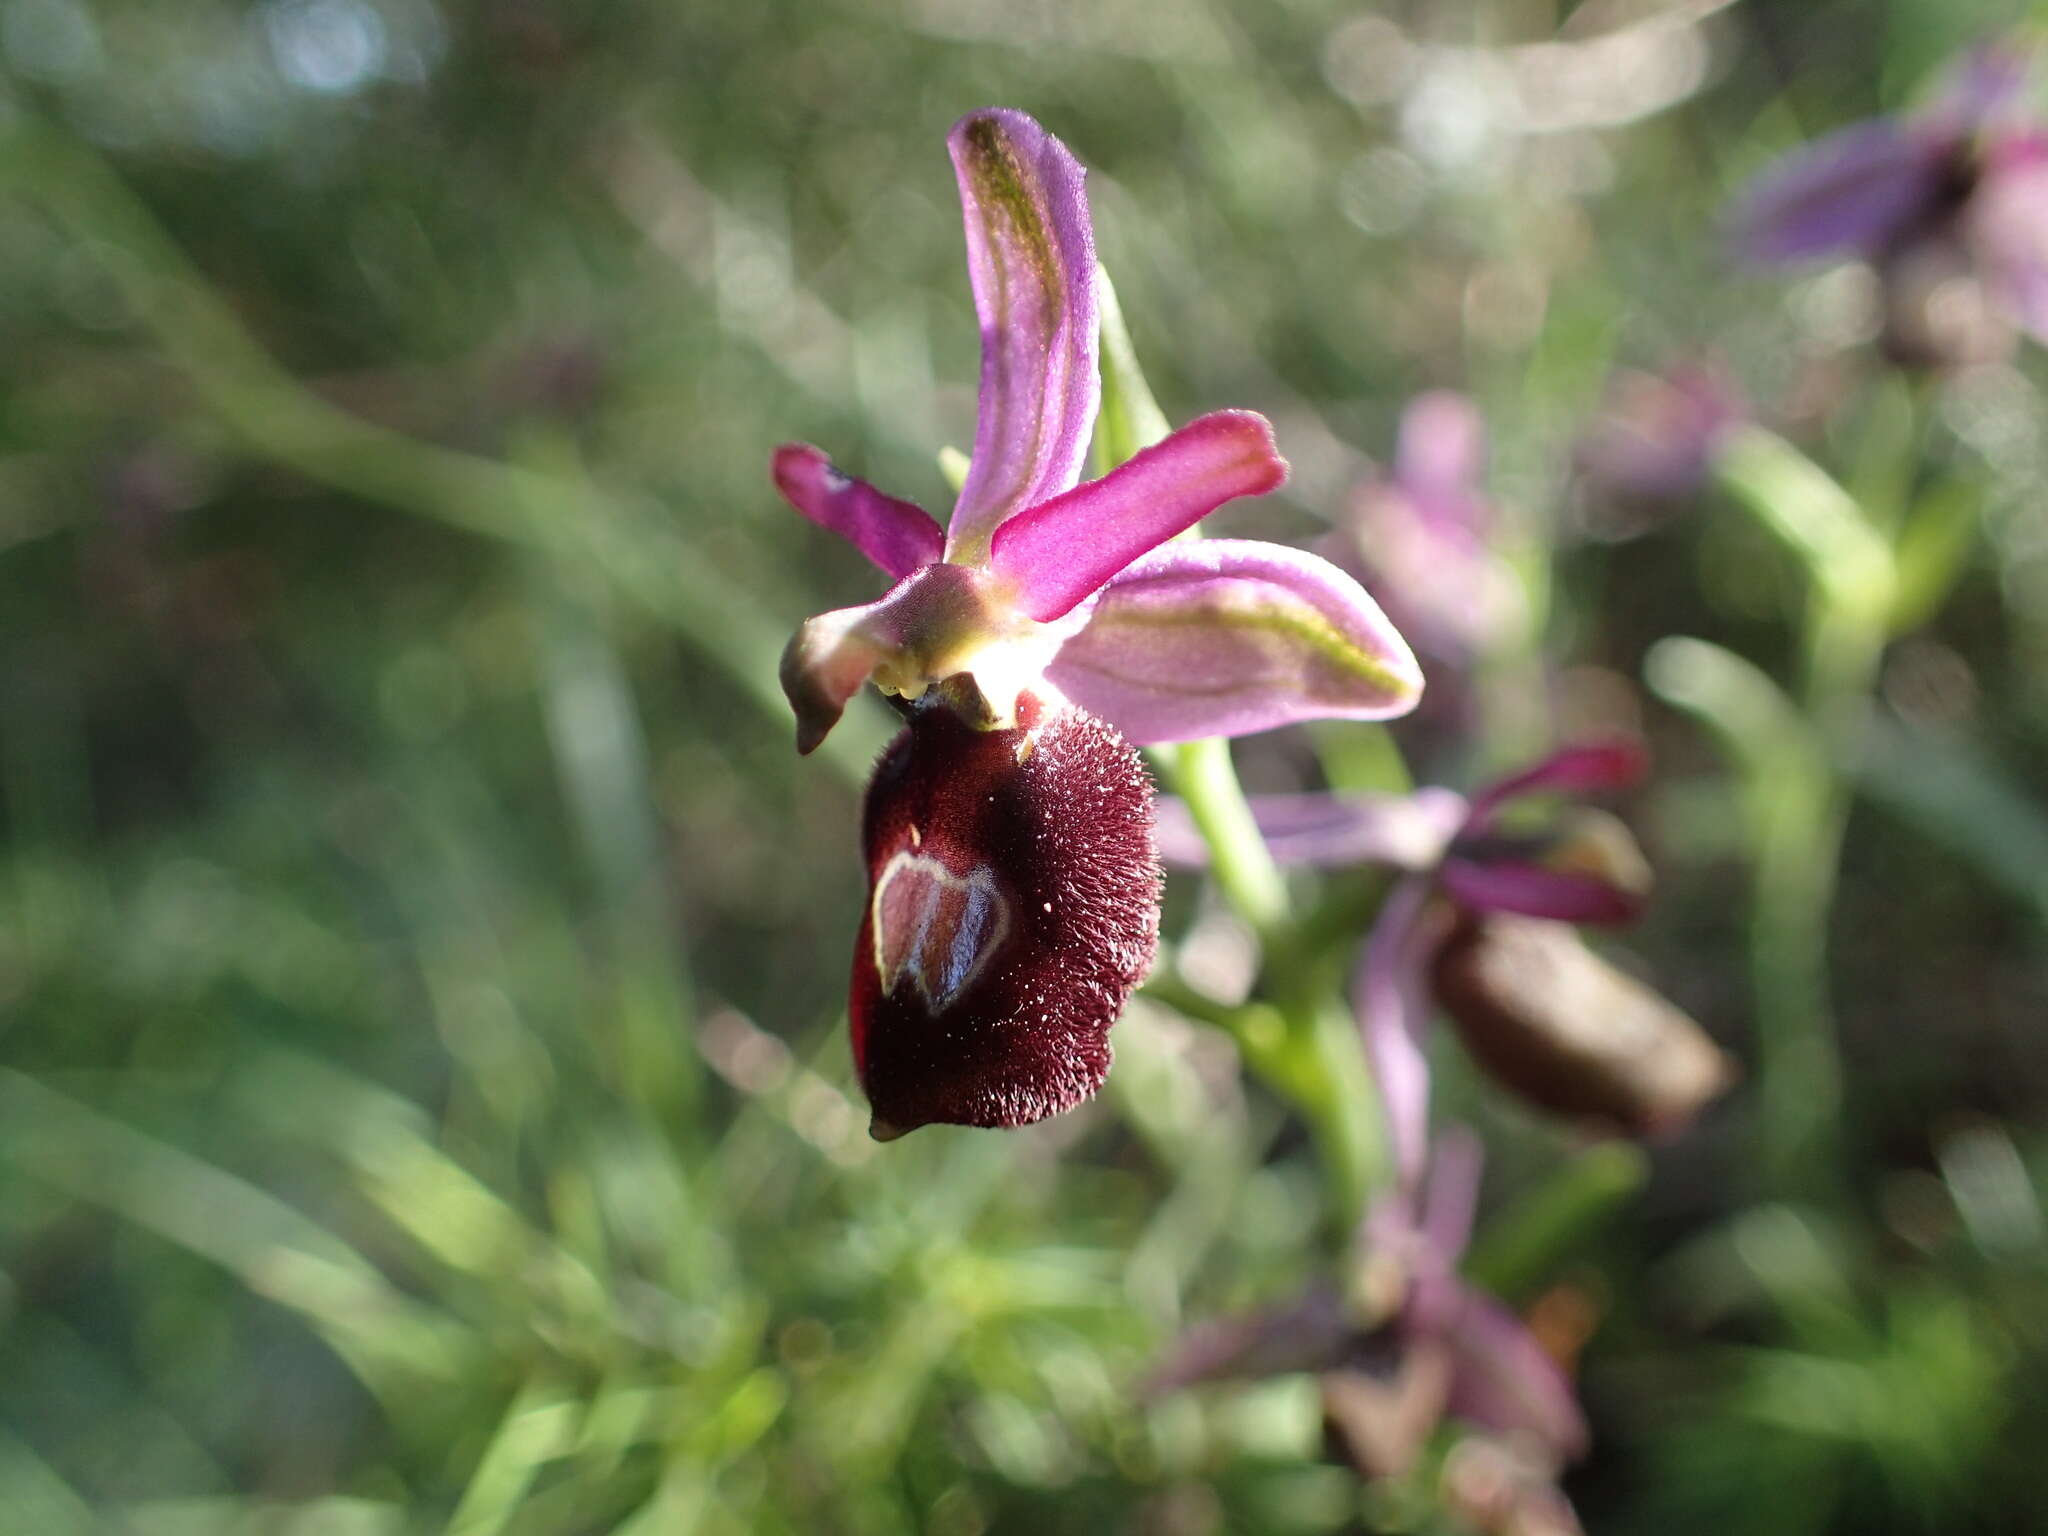 Image of Ophrys flavicans Vis.